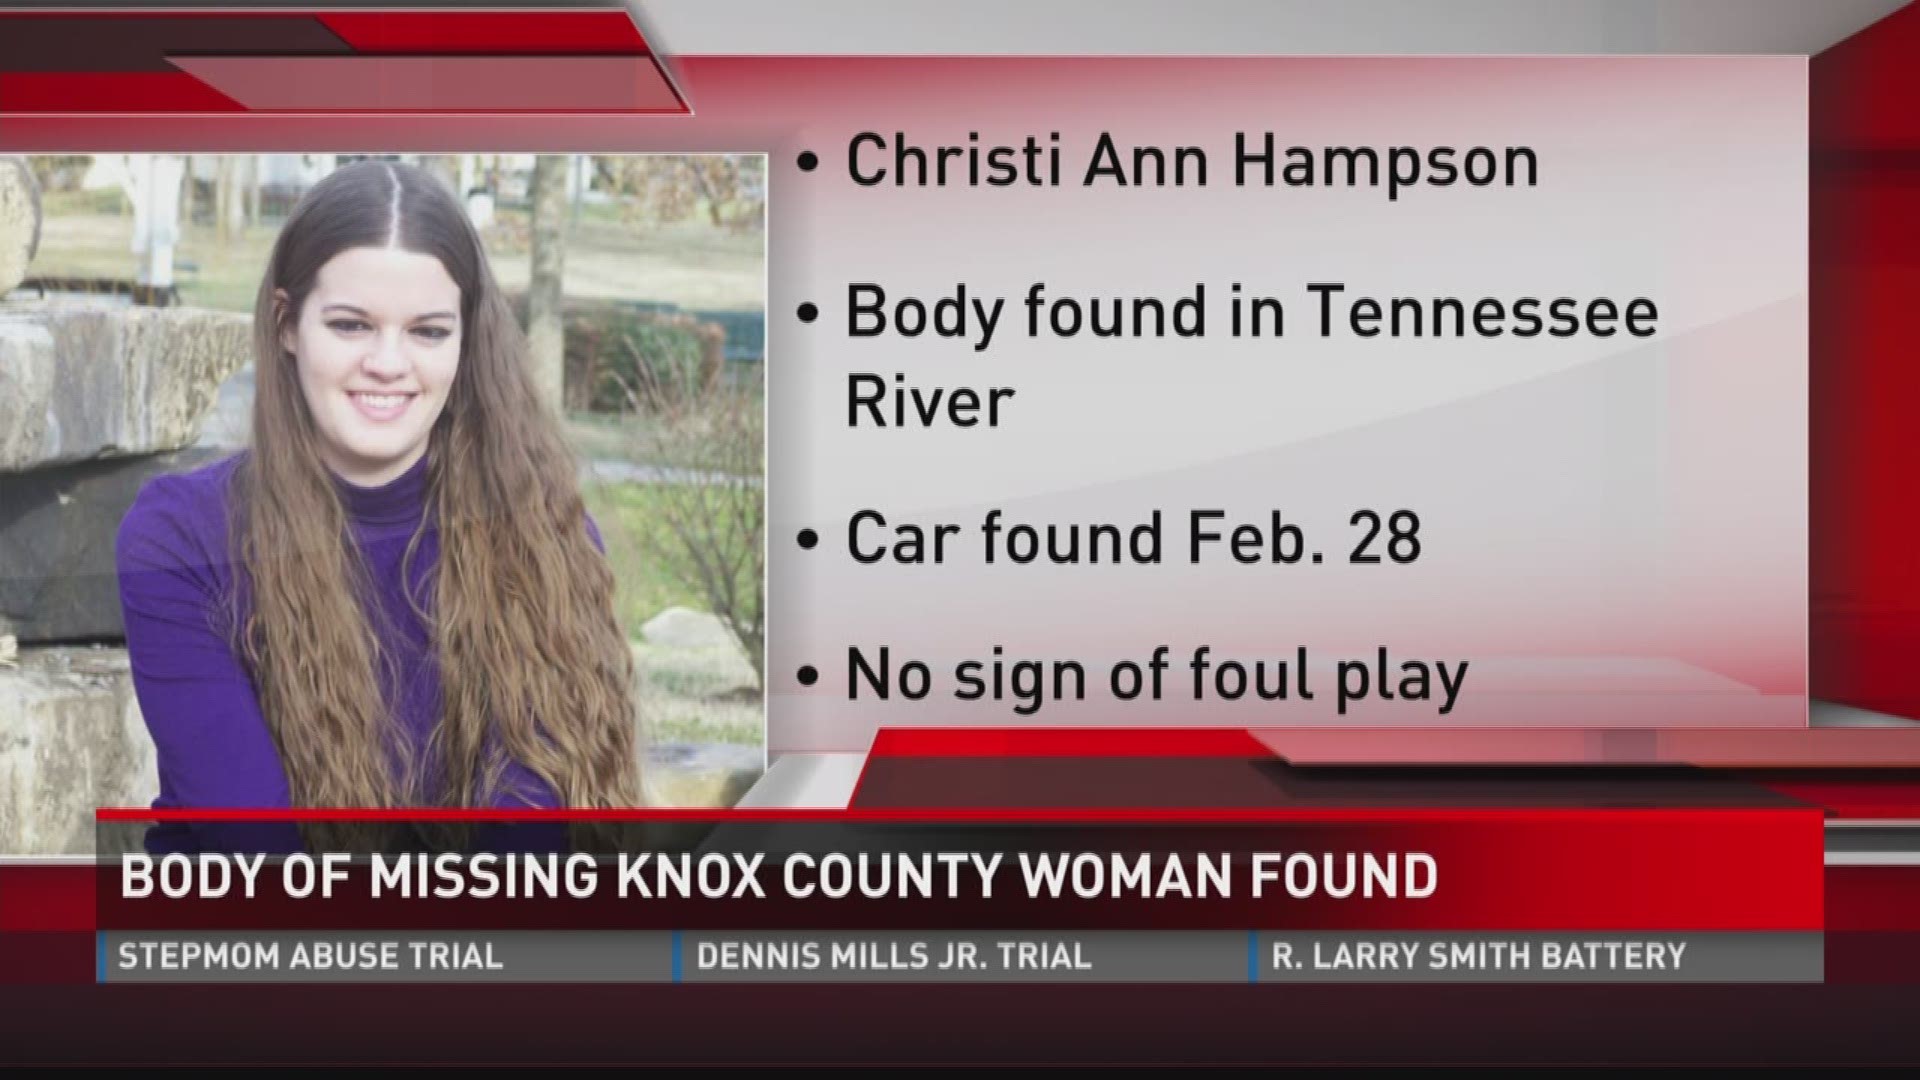 March 7, 2017: The body of a woman missing since last month has been found in Fort Loudoun Lake.